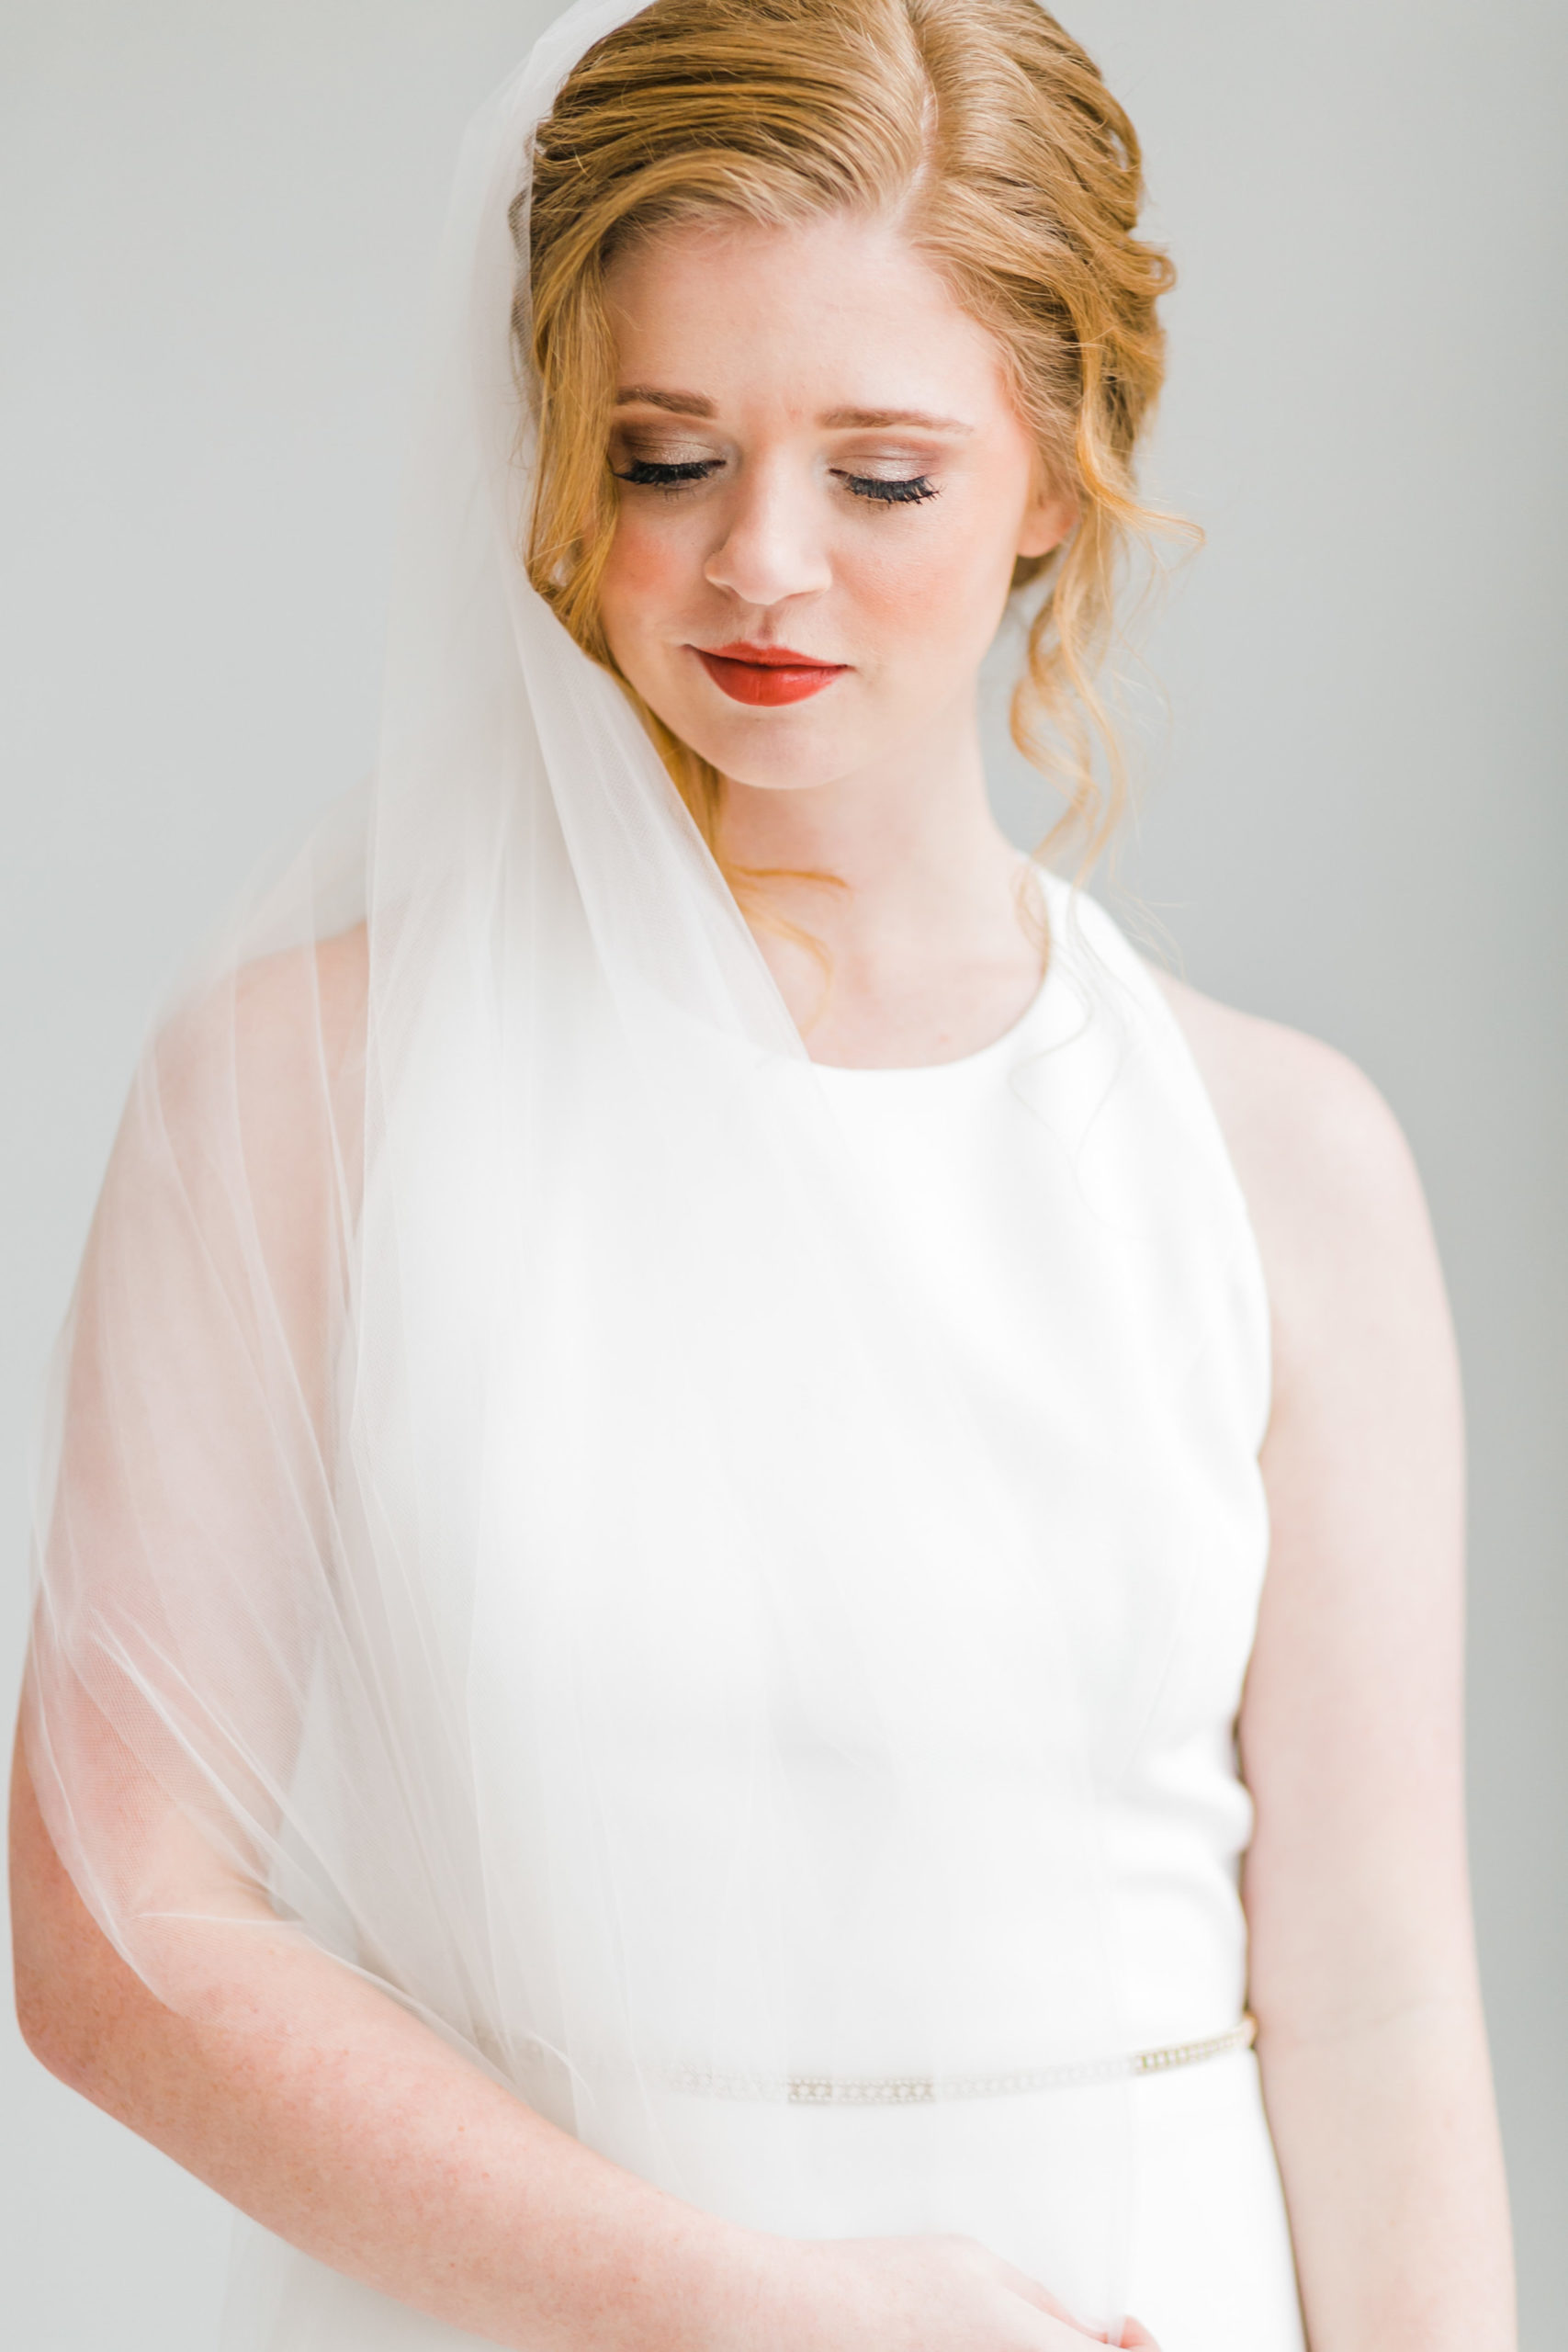 classic red head bride with unembellished dress pronovias and veil